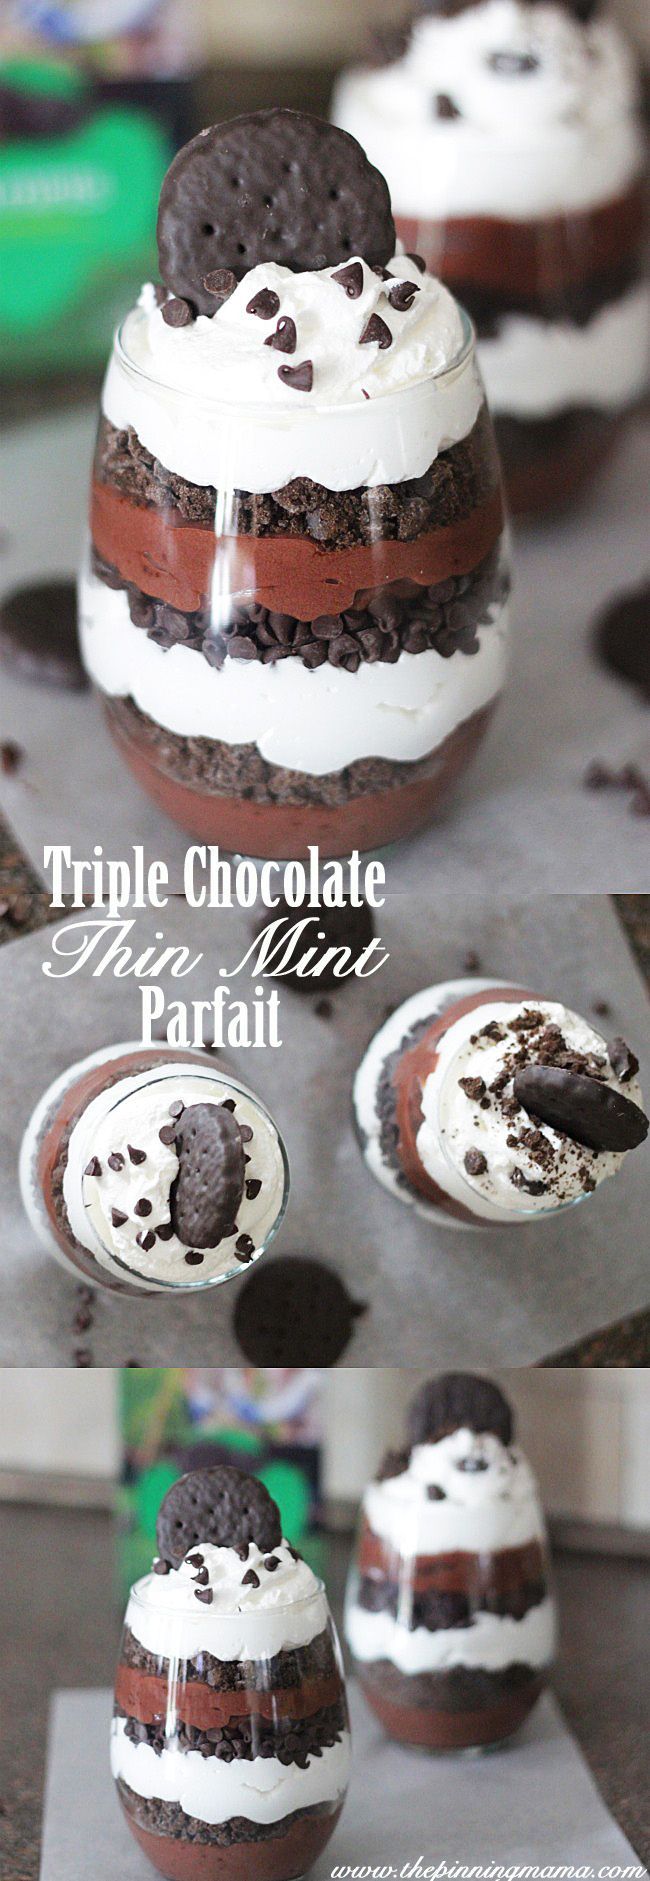 This is too easy to make!  Obsessed.  Triple Chocolate Thin Mint Parfait Recipe